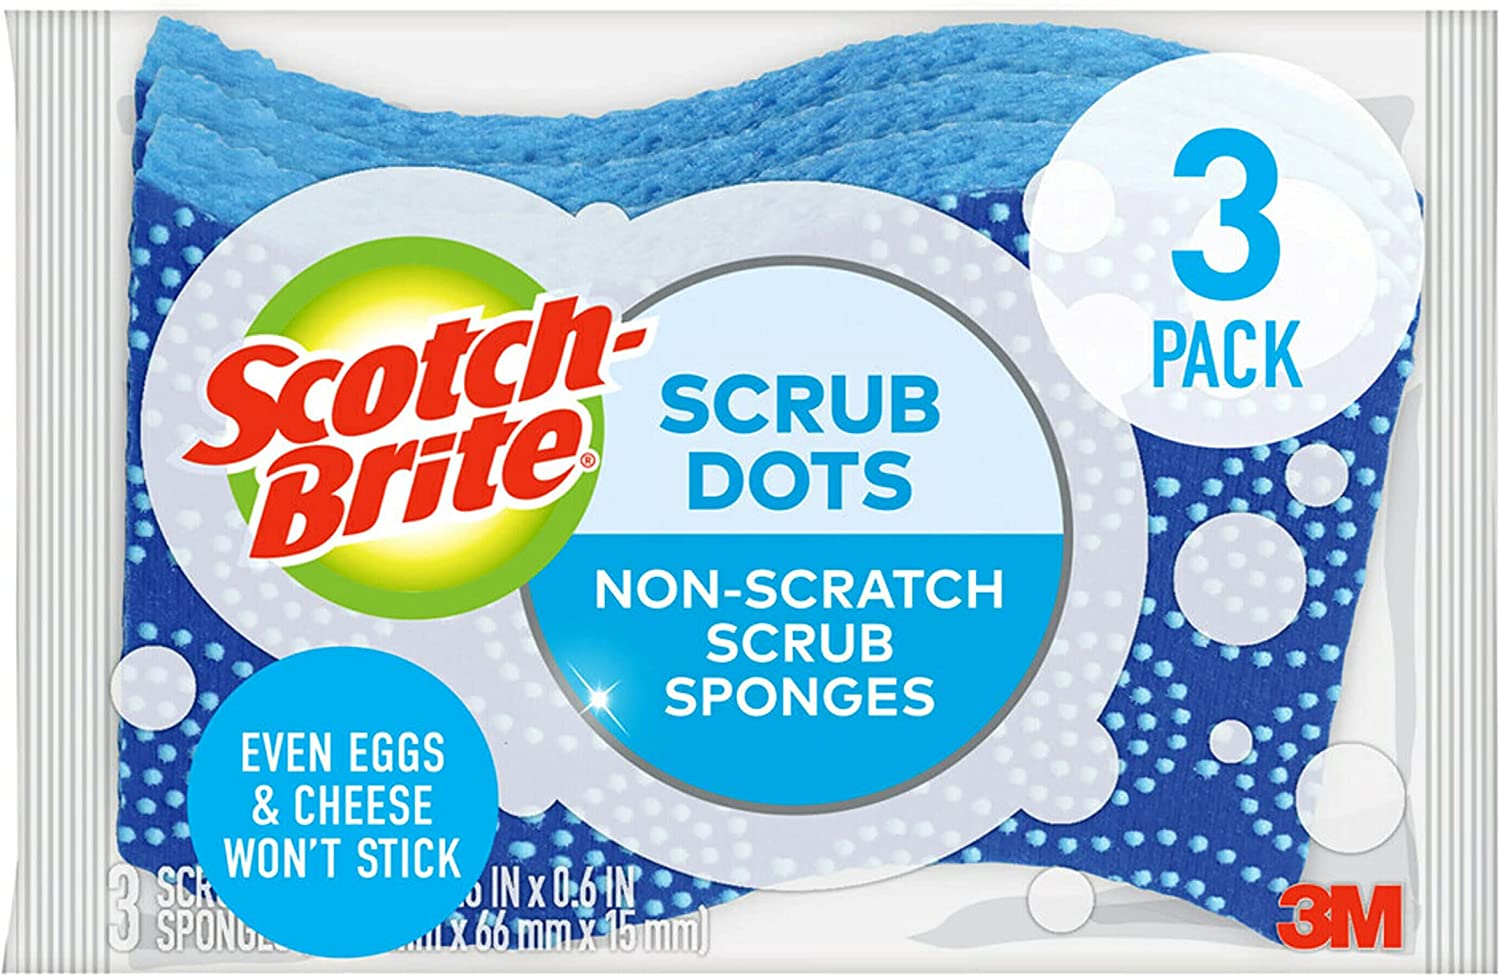 ''Scotch-Brite SCRUB Dots Non-Scratch SCRUB Sponge, Rinses Clean, For Washing Dishes and Cleaning Kit